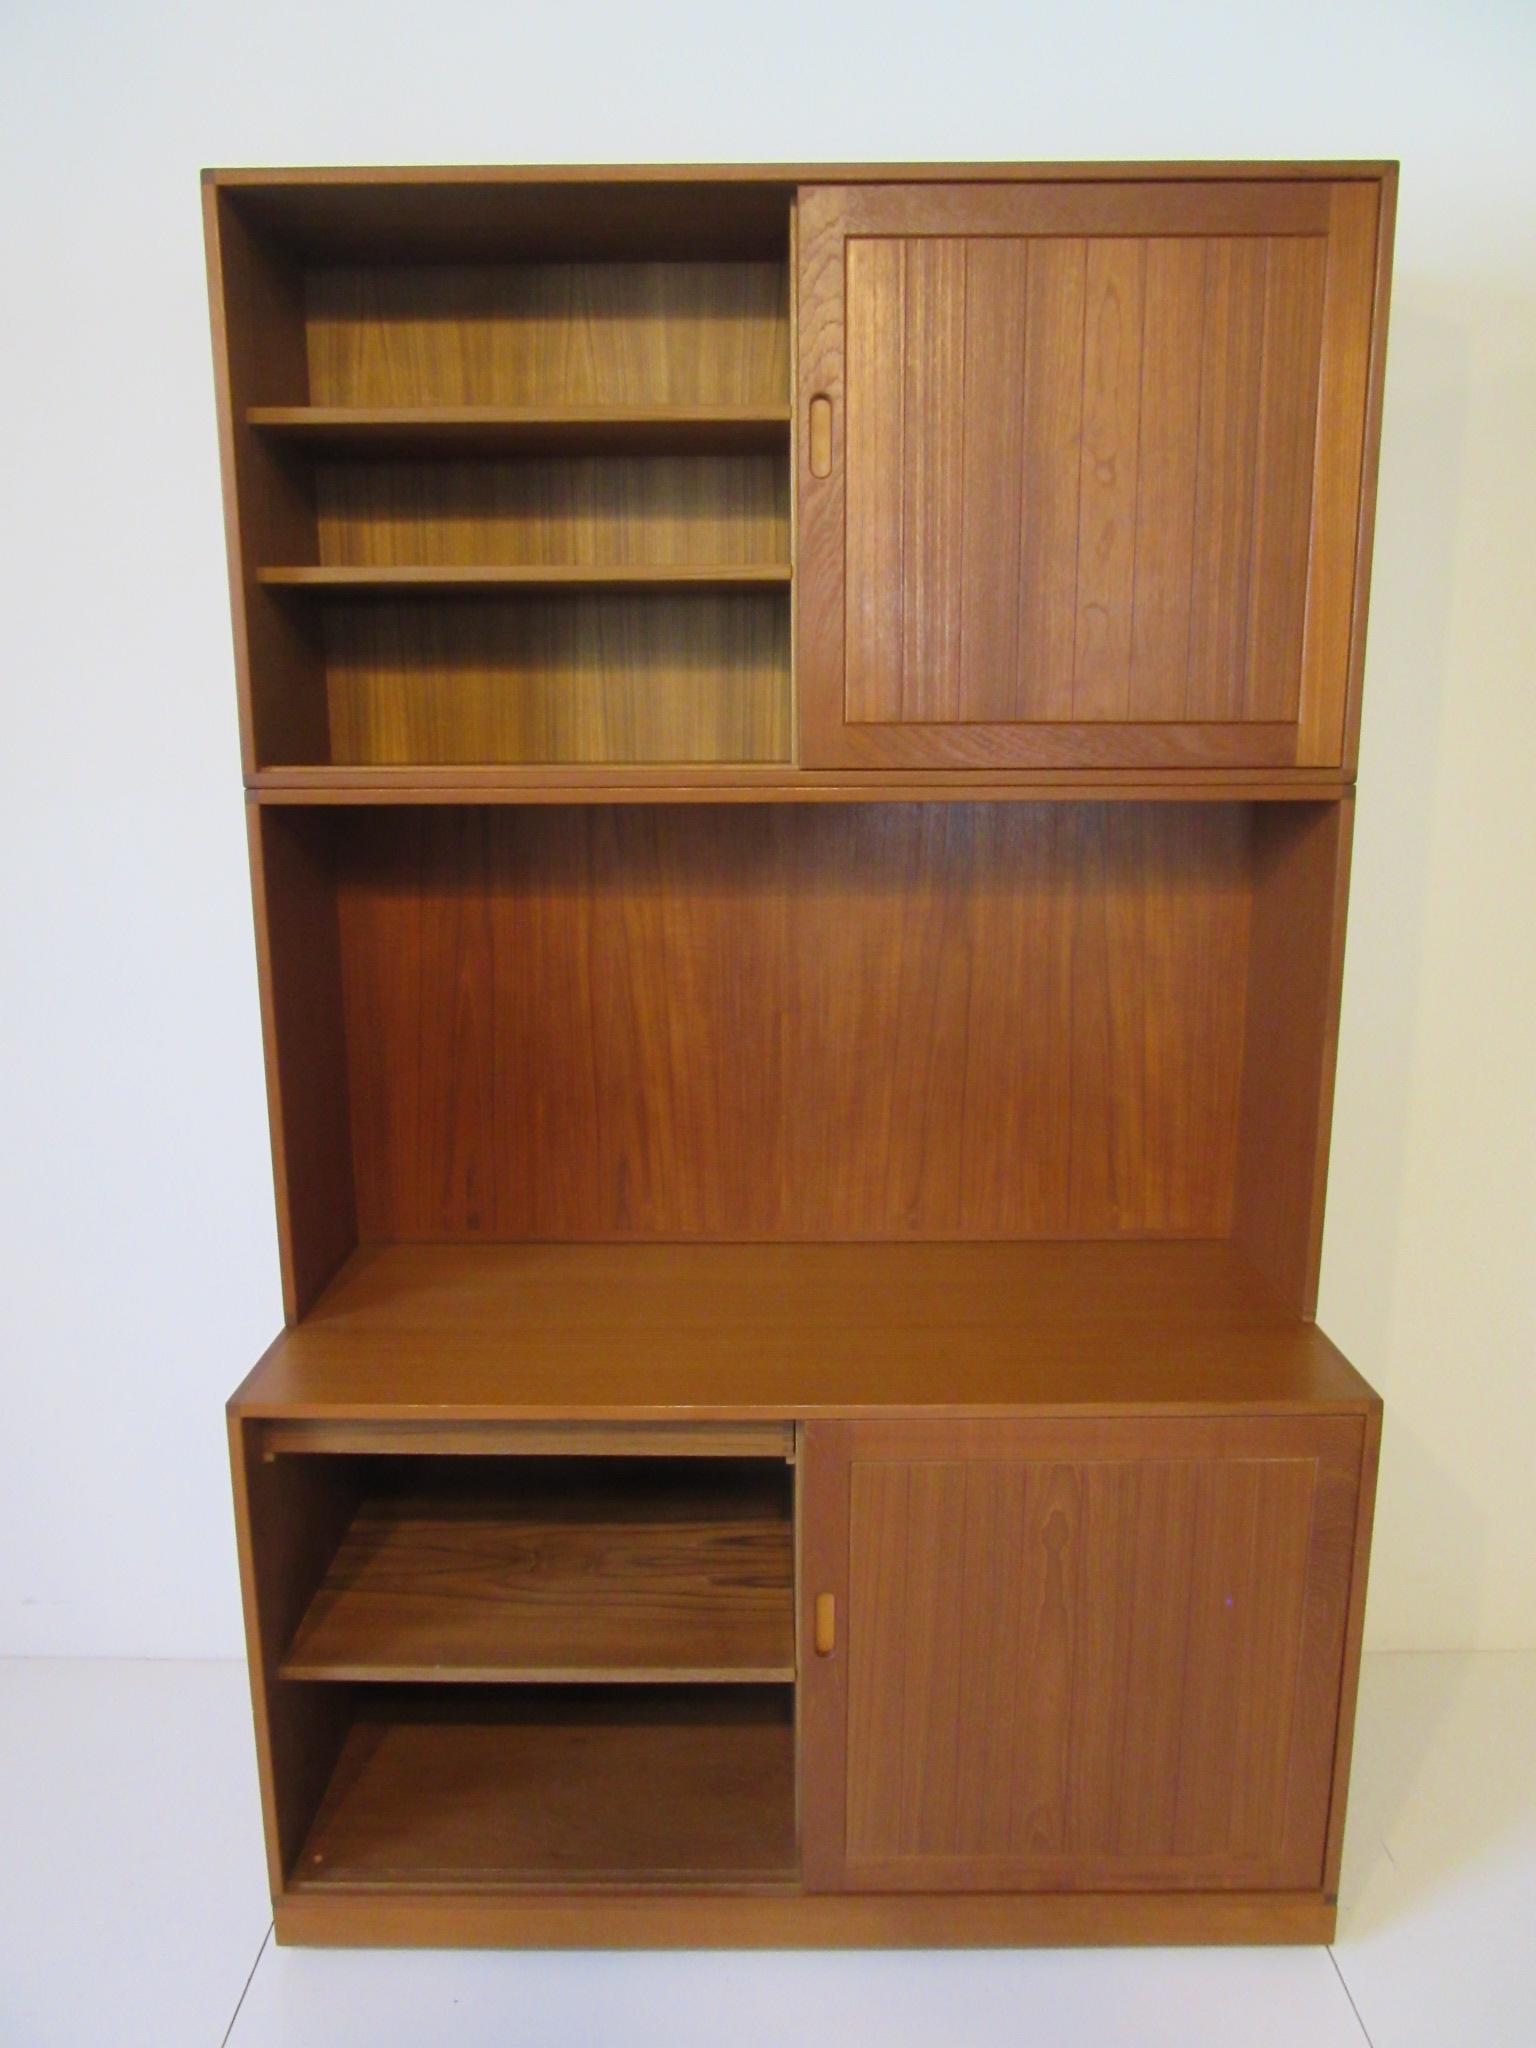 A well crafted 3-piece cabinet or bookcase with grooved panel sliding doors that has fine leather inside the finger pulls, adjustable shelves and the lower cabinet having a small drawer. This solid teak constructed cabinet was bought in Denmark in